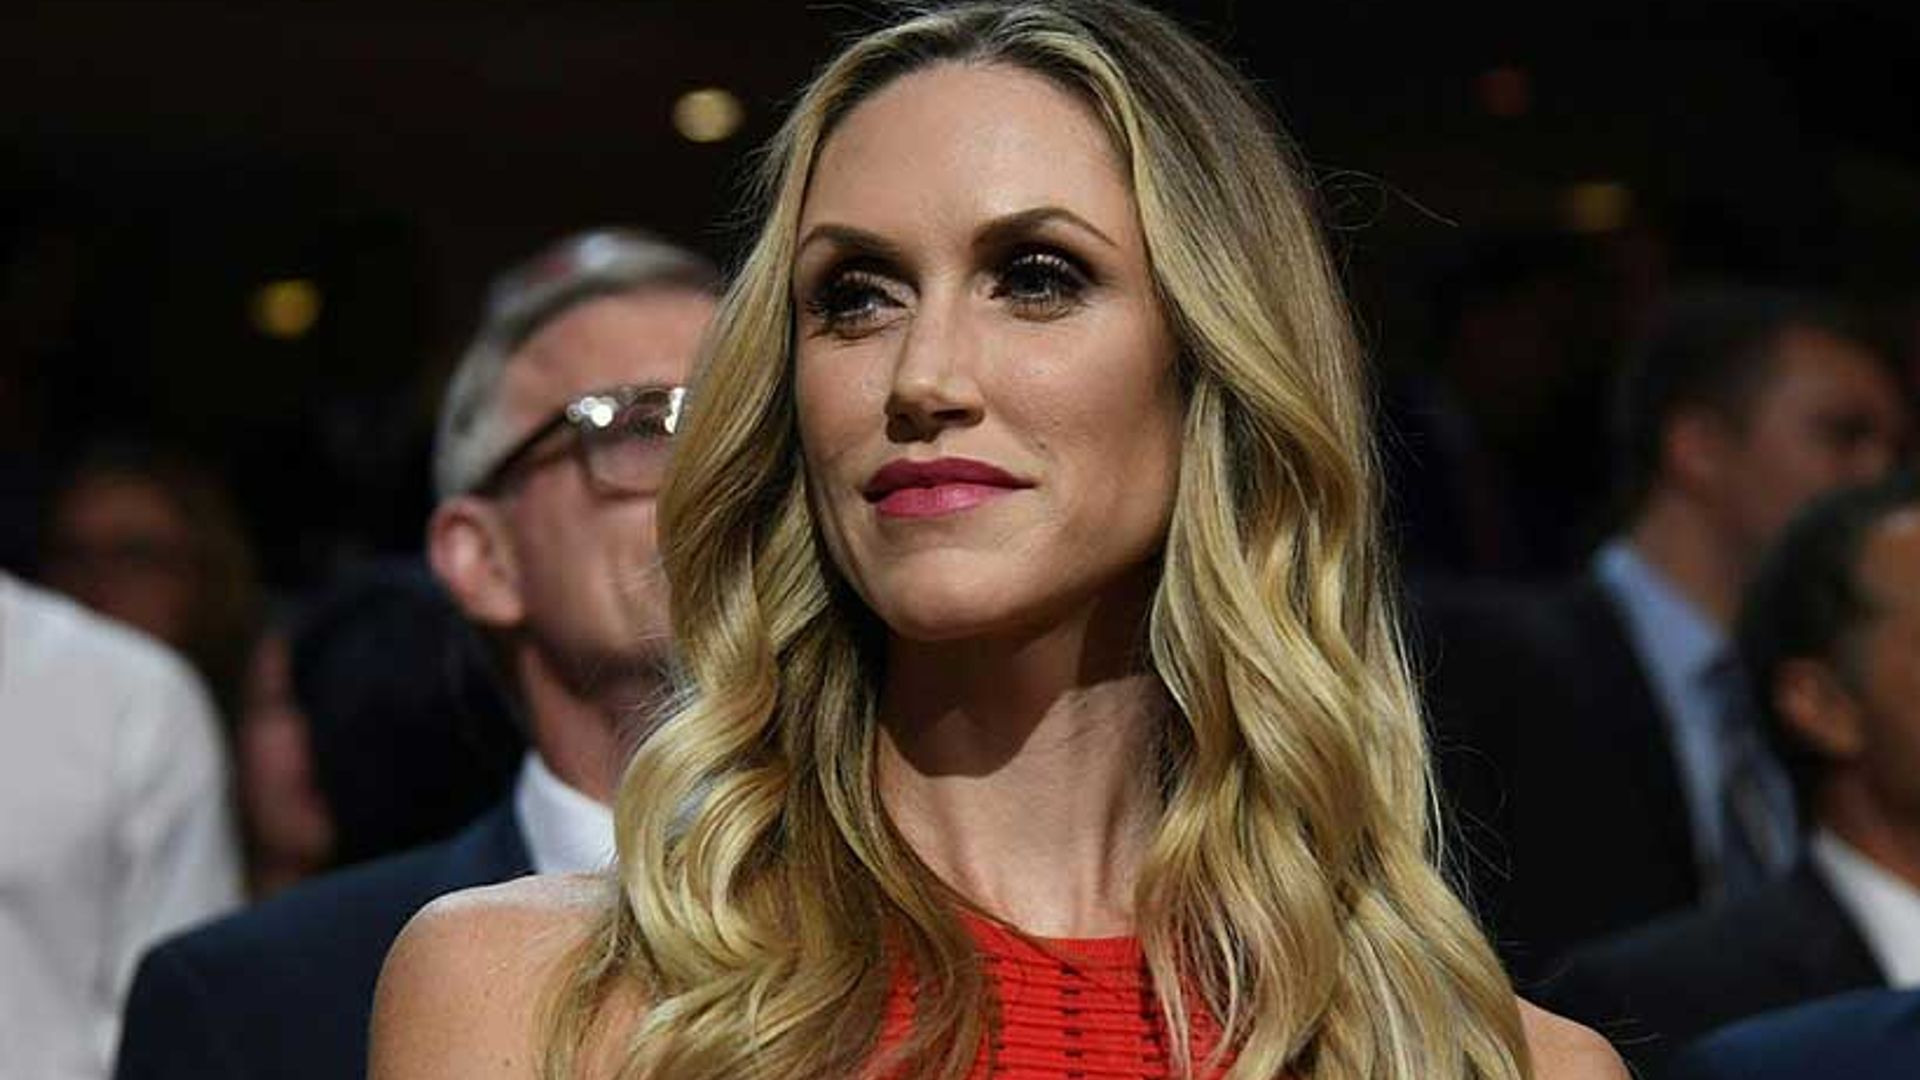 Exclusive! Lara Trump talks about being part of America's first family